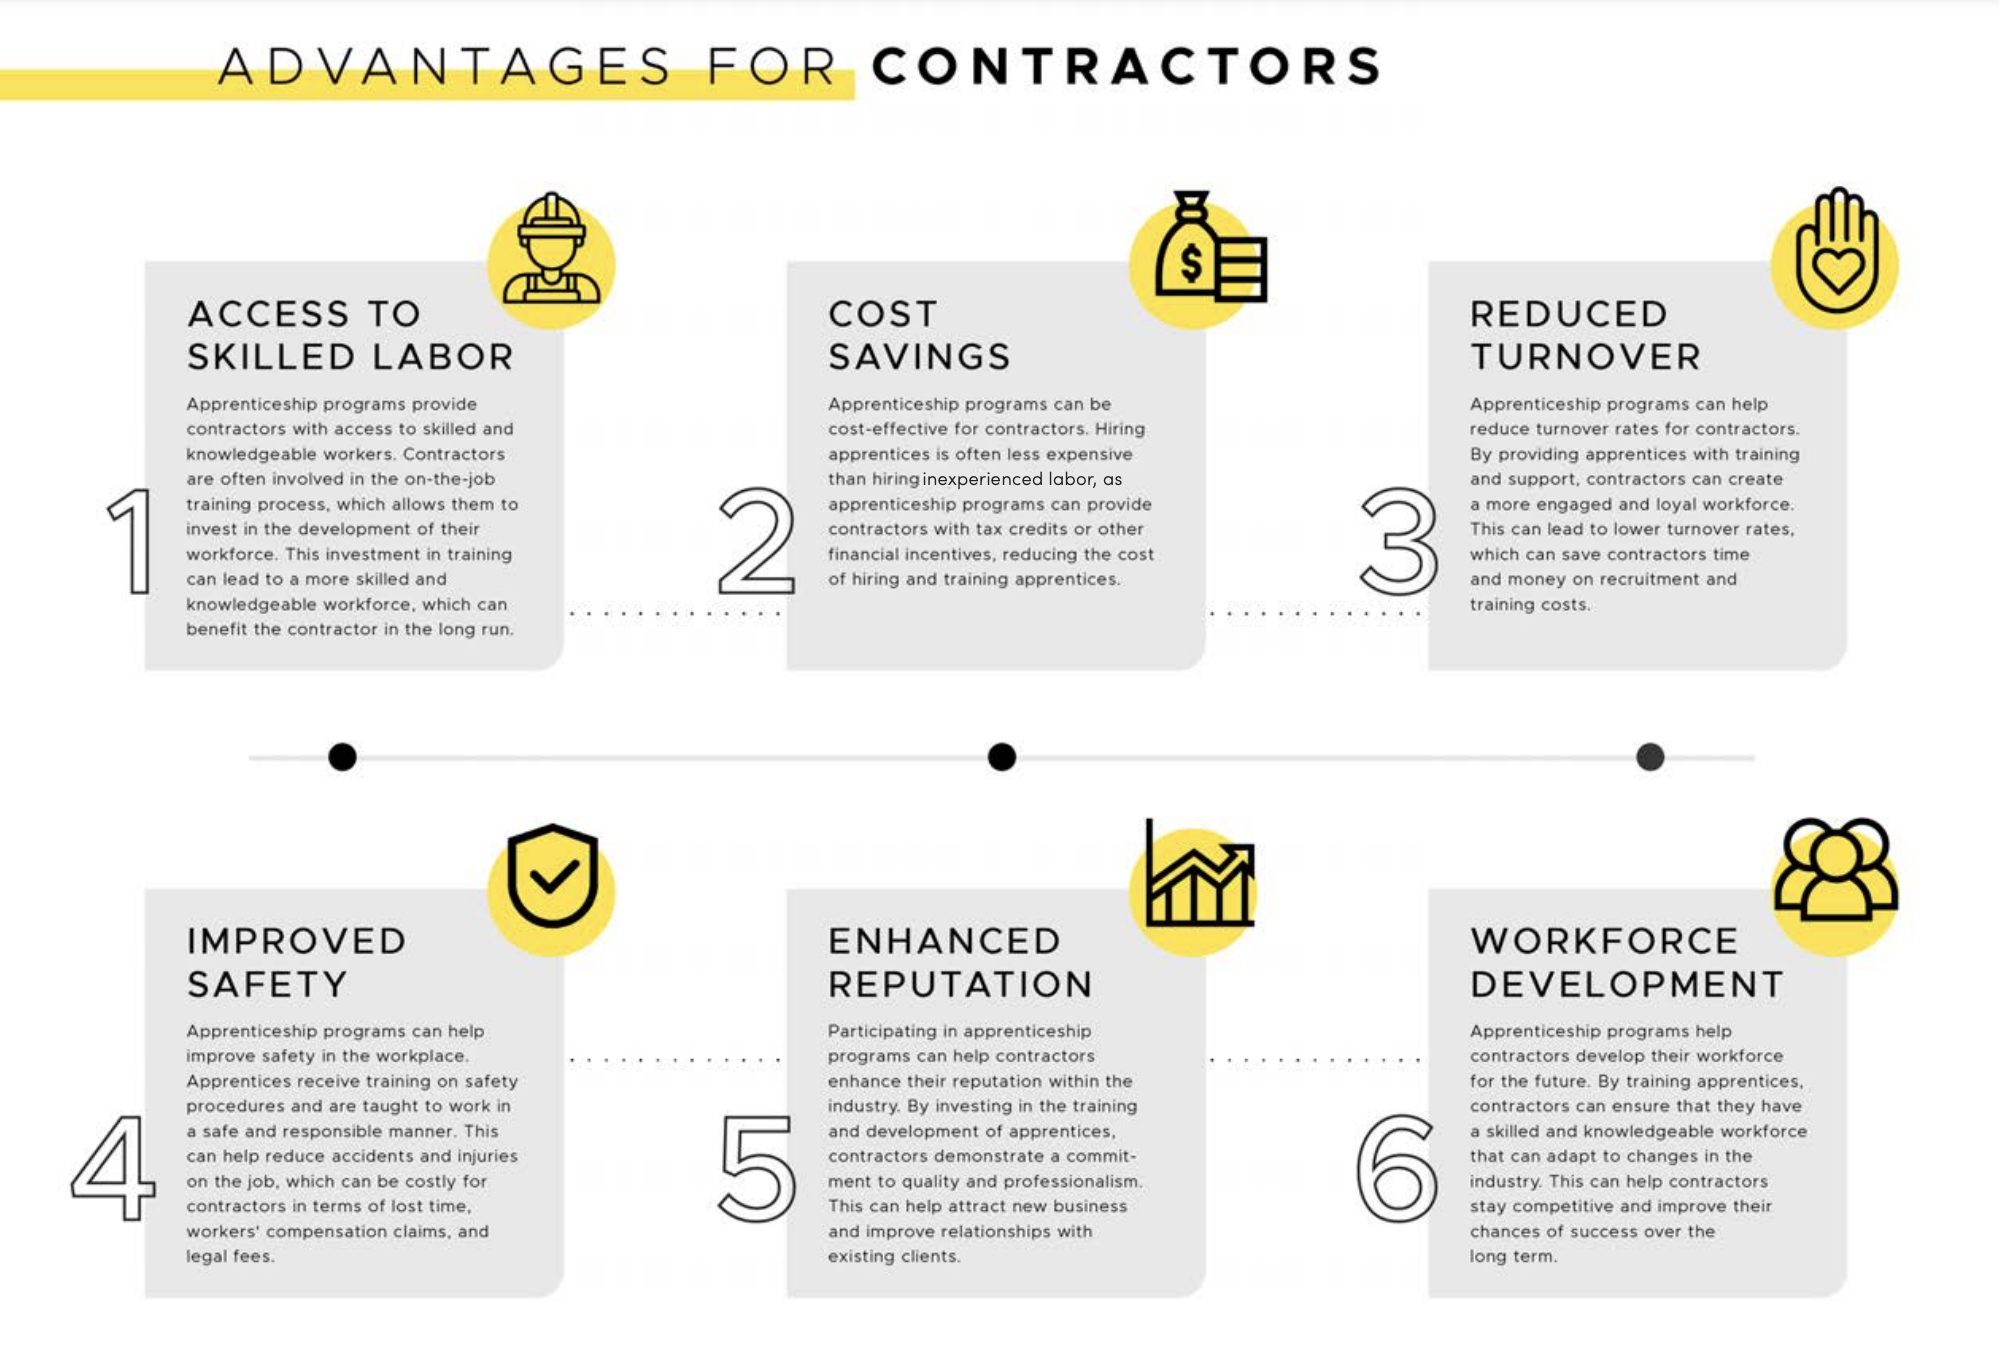 Detailed infographic on benefits contractors receive by working with apprentices.